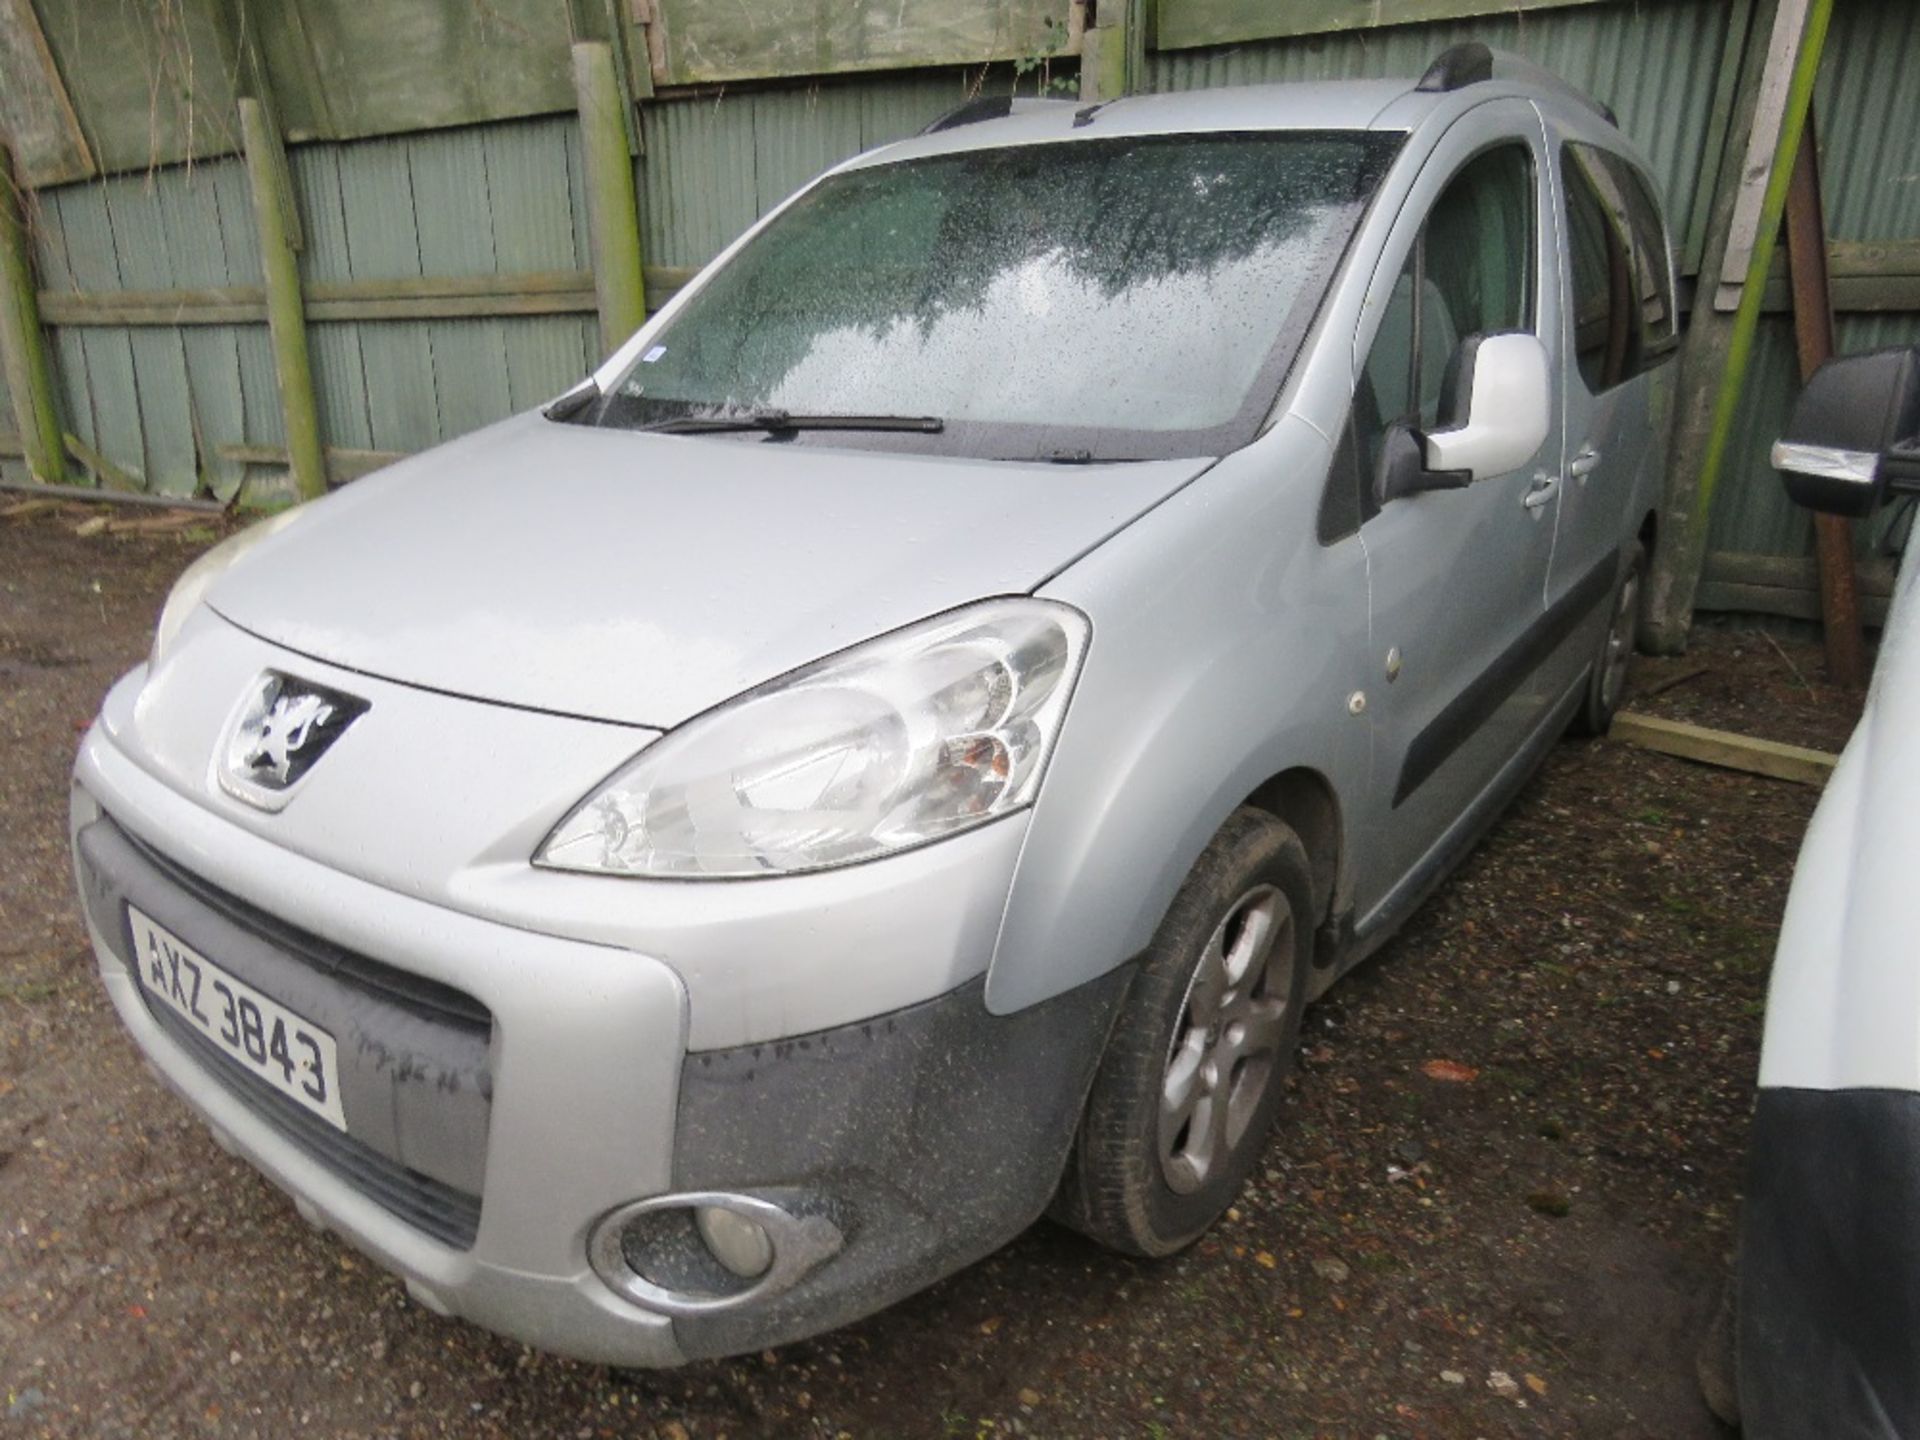 PEUGEOT PARTNER CAR REG:AXZ 3843. WITH V5 FIRST REGISTERED 23/10/2010. MOT EXPIRED. MANUAL GEARBOX. - Image 3 of 8